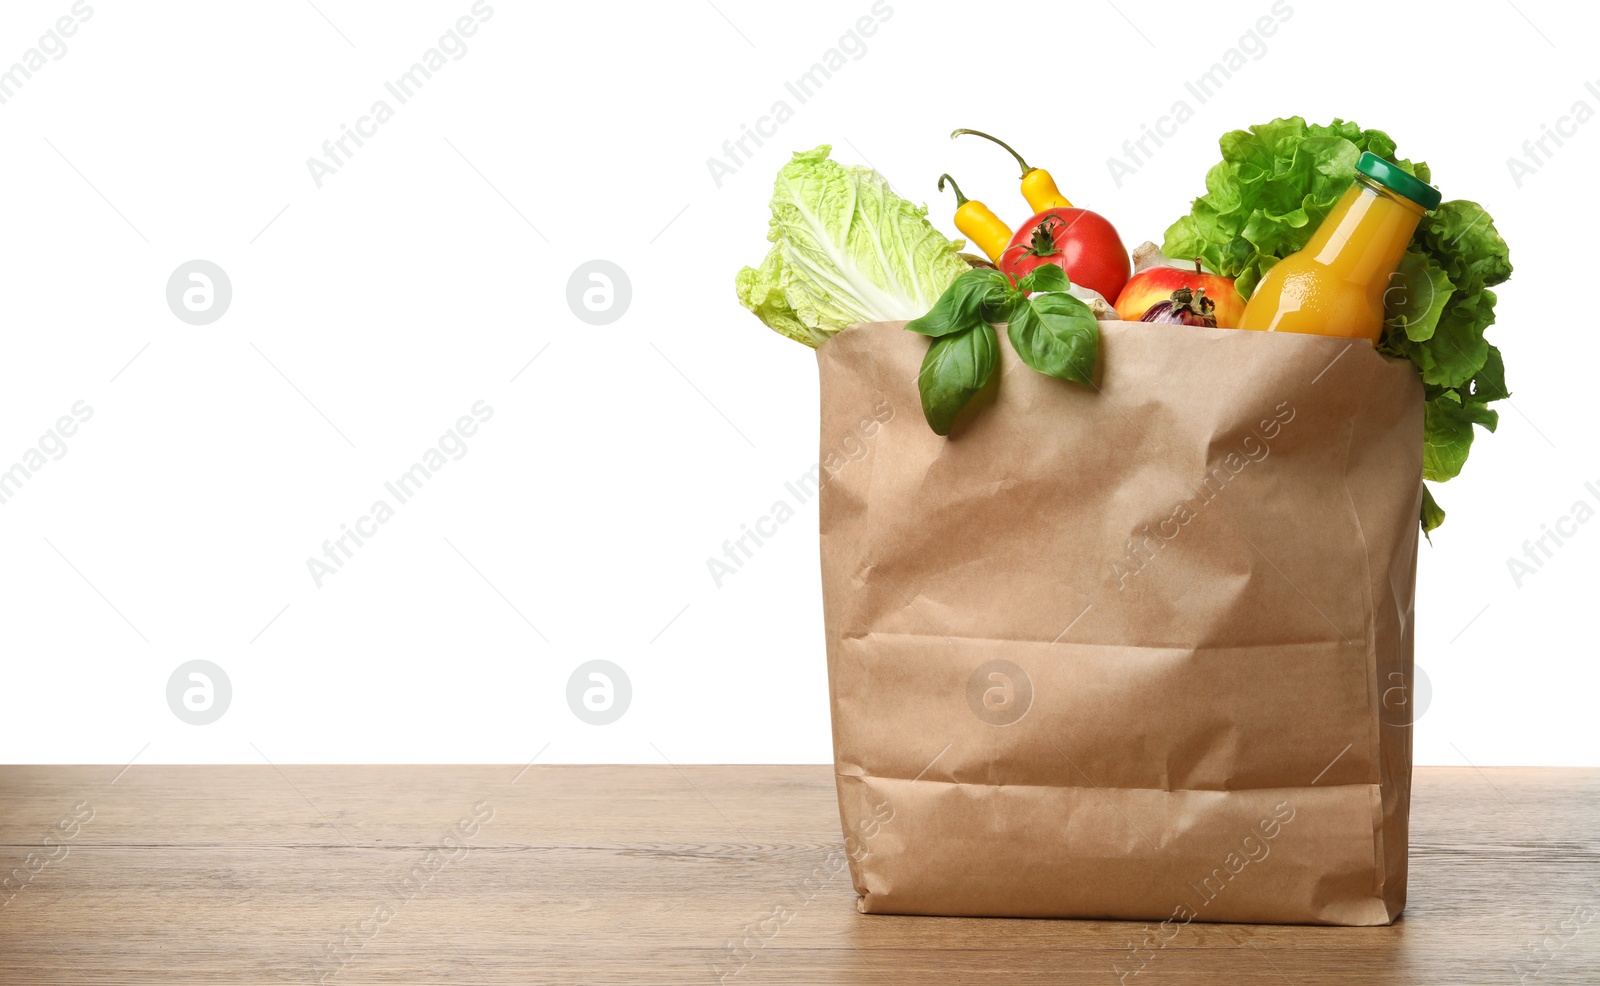 Photo of Paper bag with vegetables and bottle of juice on table against white background. Space for text